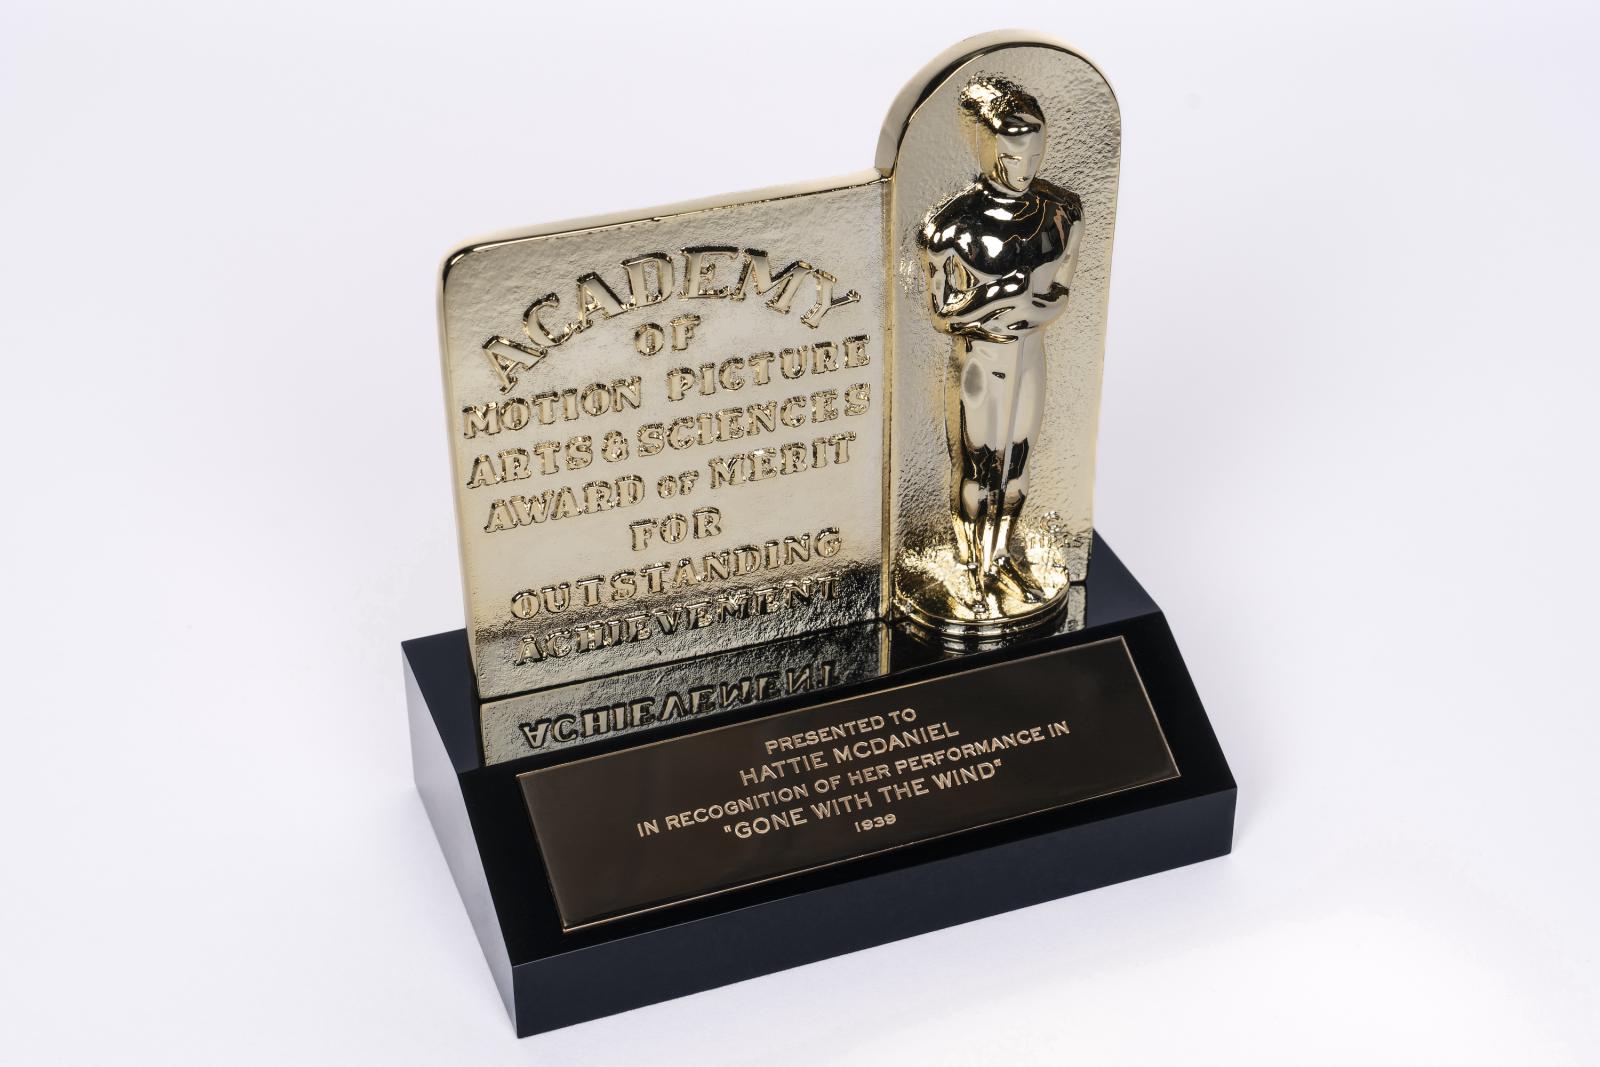 Hattie McDaniel's 1939 Academy Award presented by the Academy Arts & Sciences of Motion Picture 